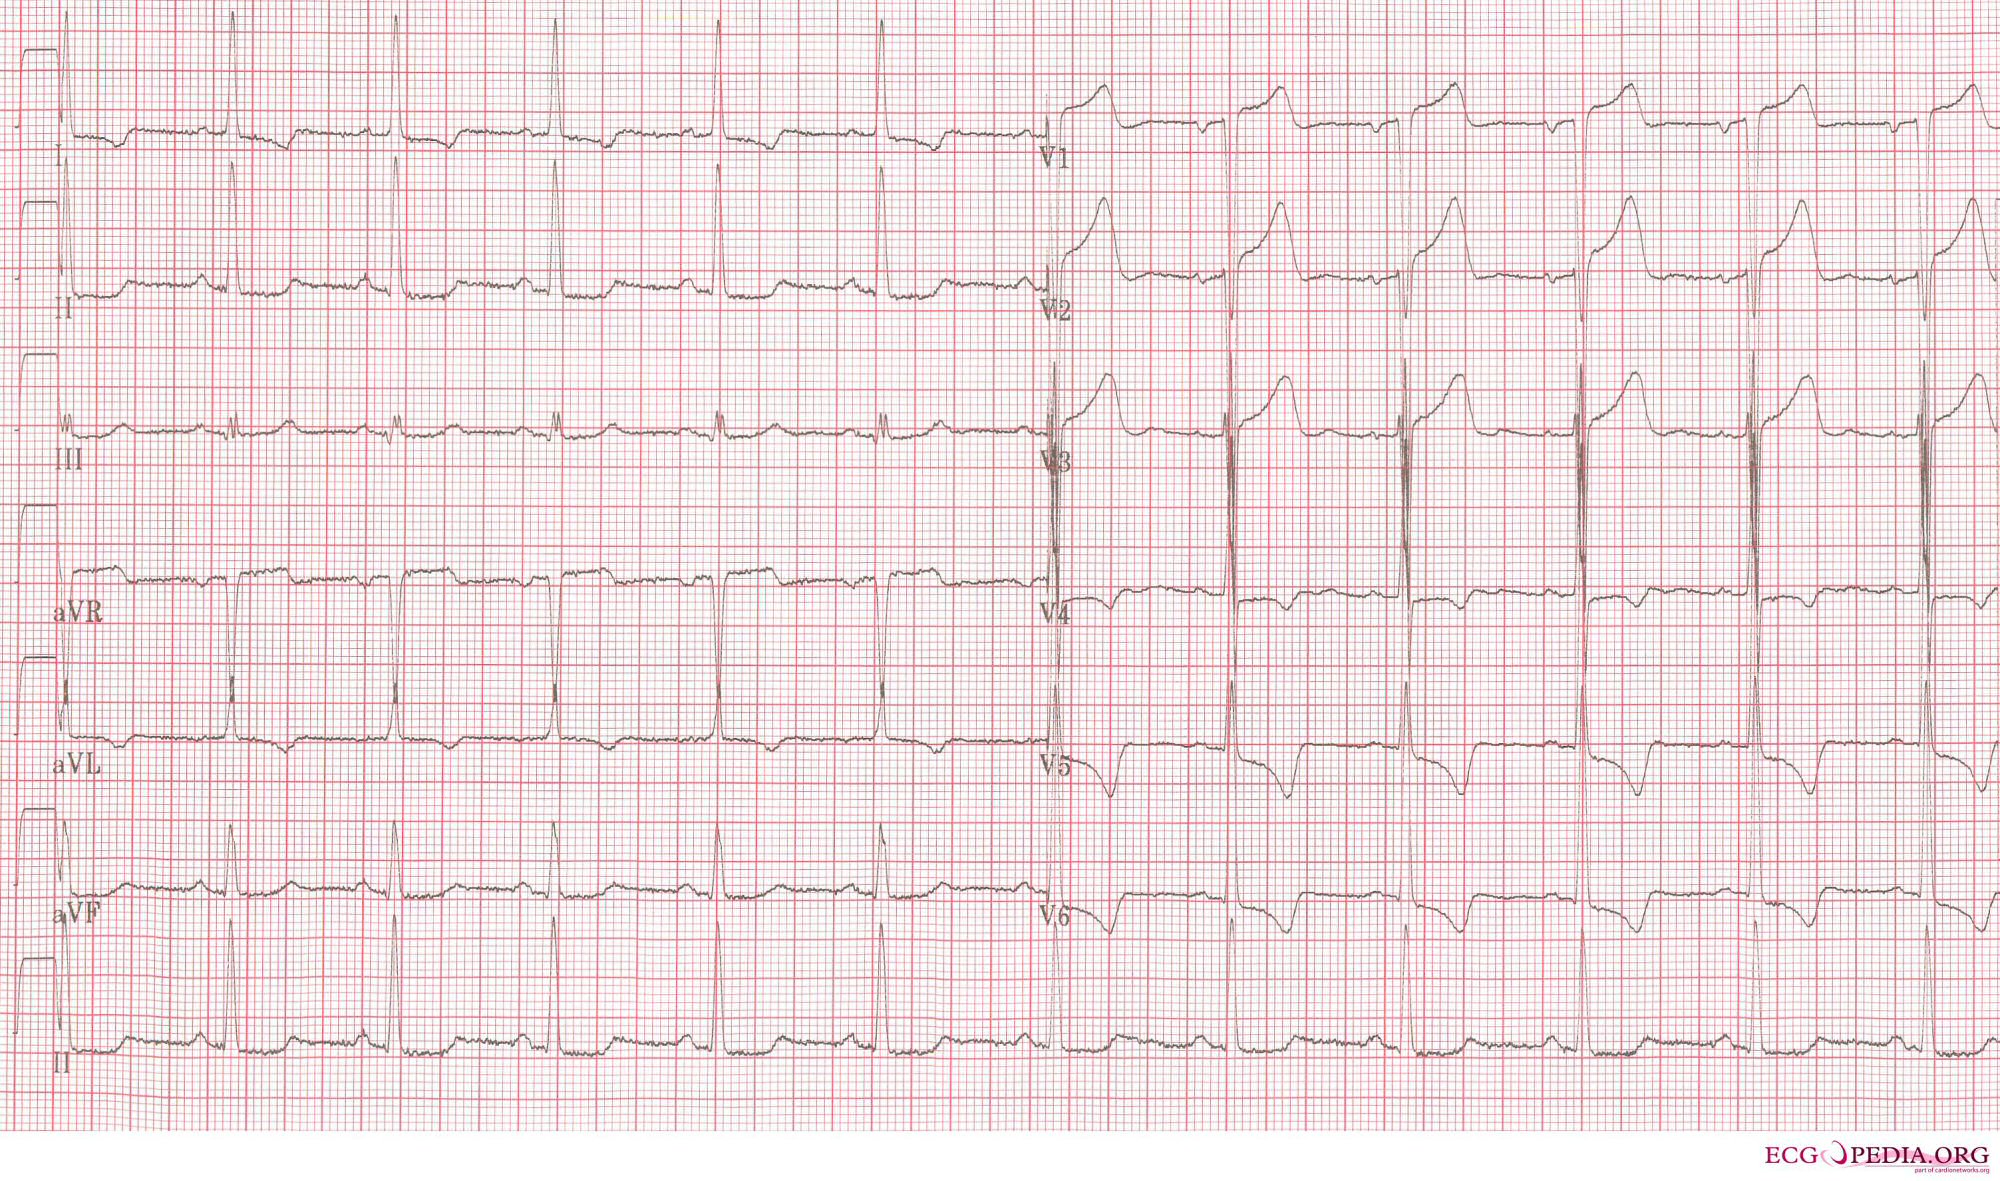 ECG of a patient with LVH and subendocardial ischemia leading to positive cardiovascular markers in blood testing.